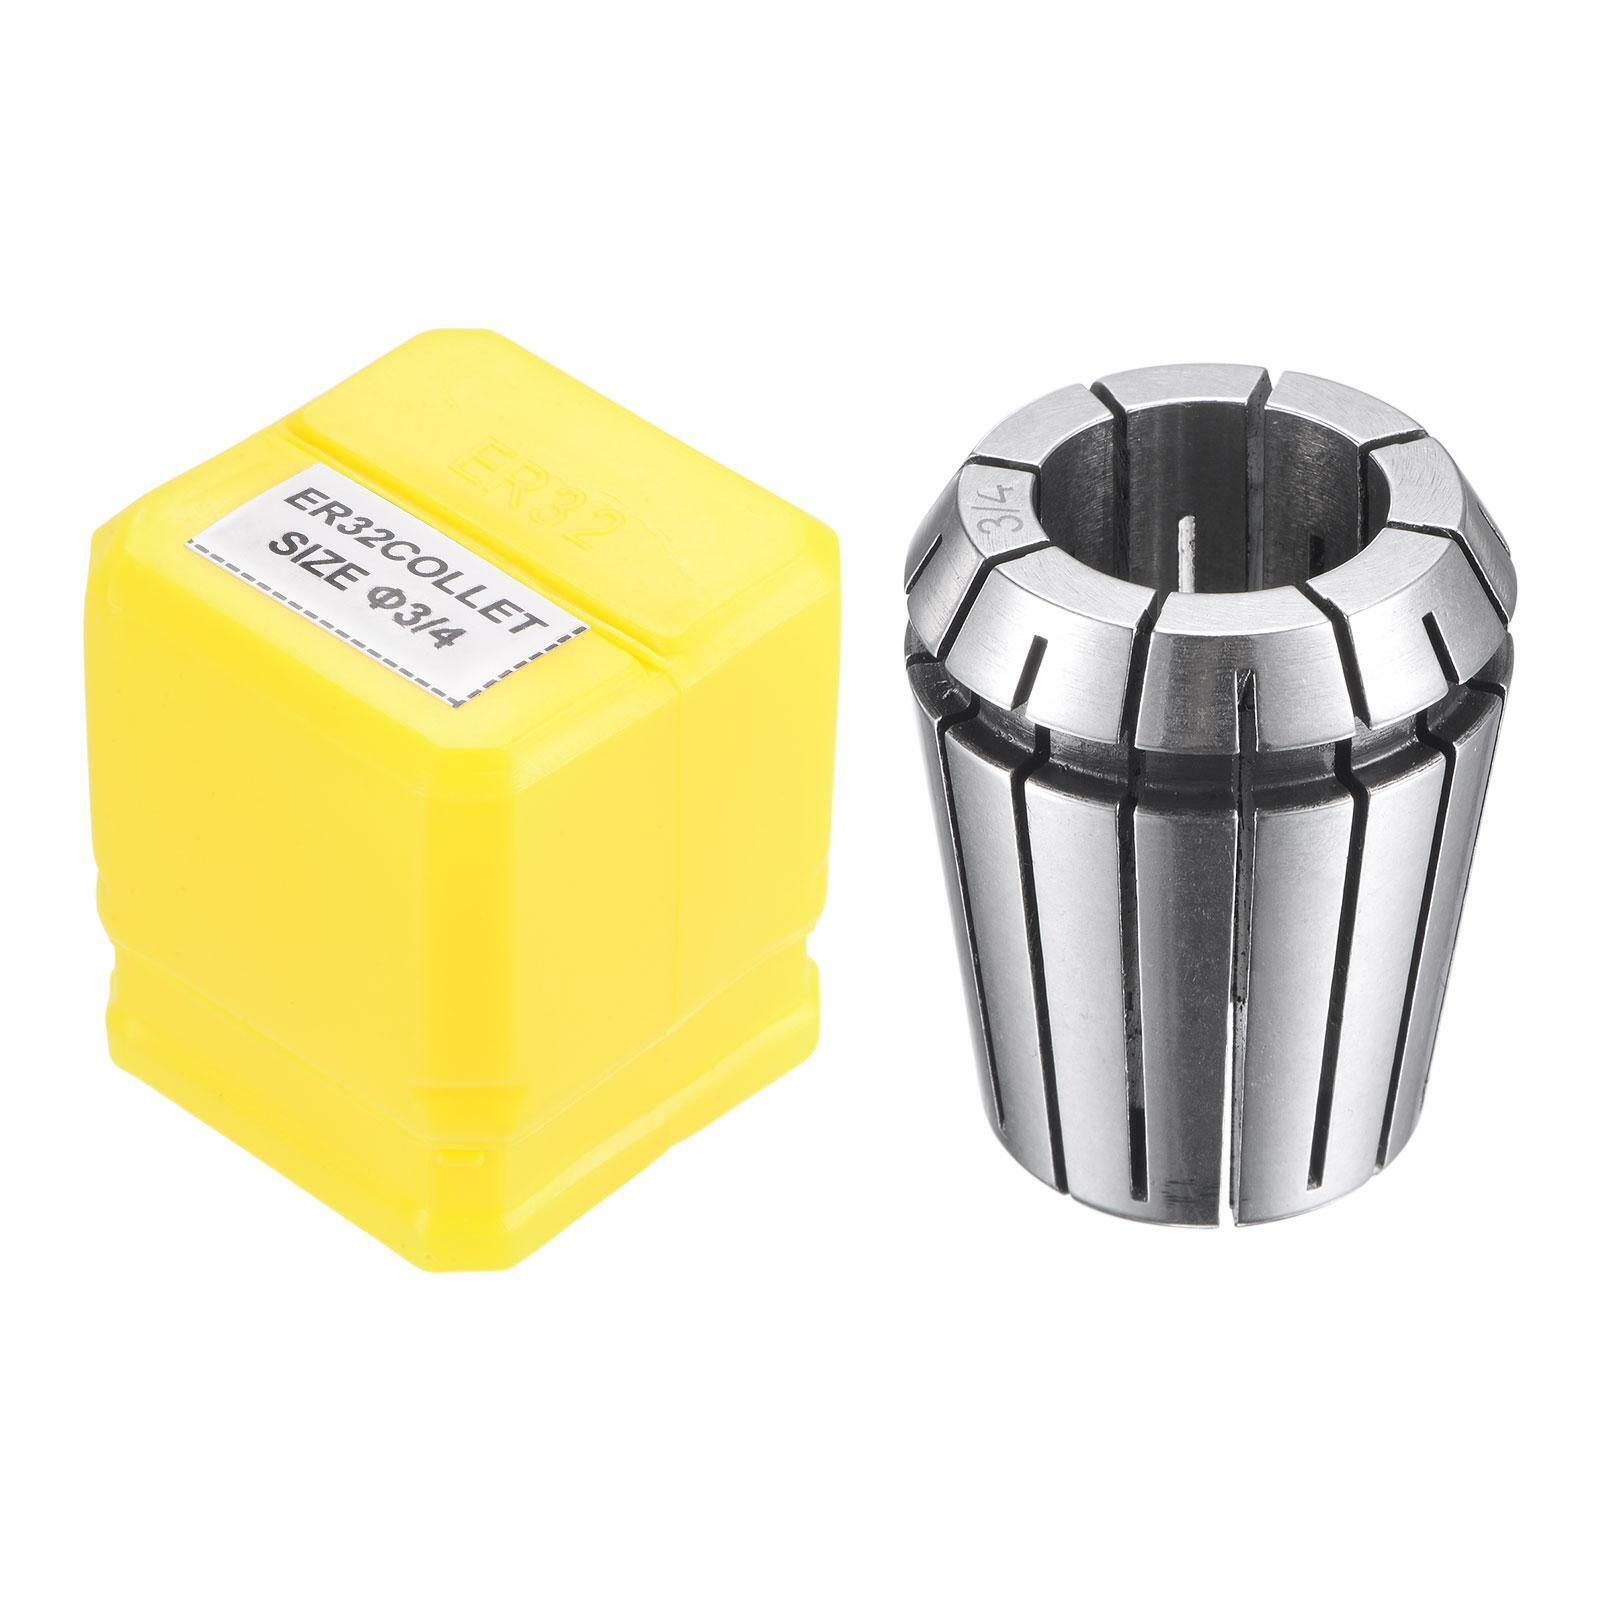 Er32 Spring Collet 3/4" Chuck For Cnc Engraving Machine Lathe Milling Tool